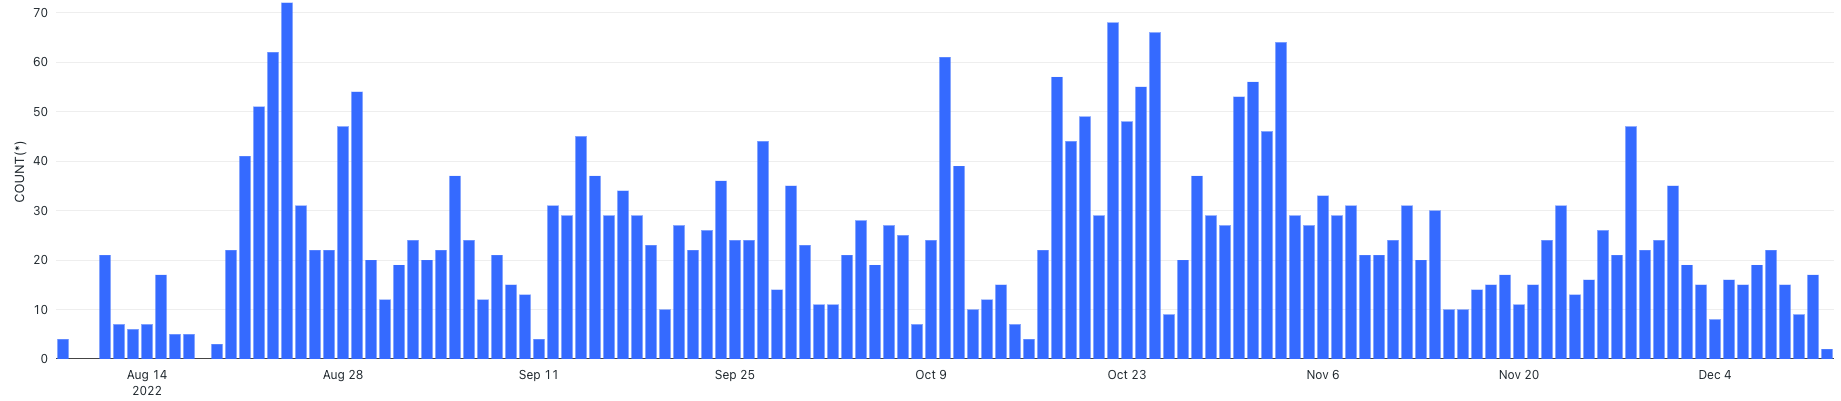 Figure 10. The number of PayZero scam events from August to December 2022